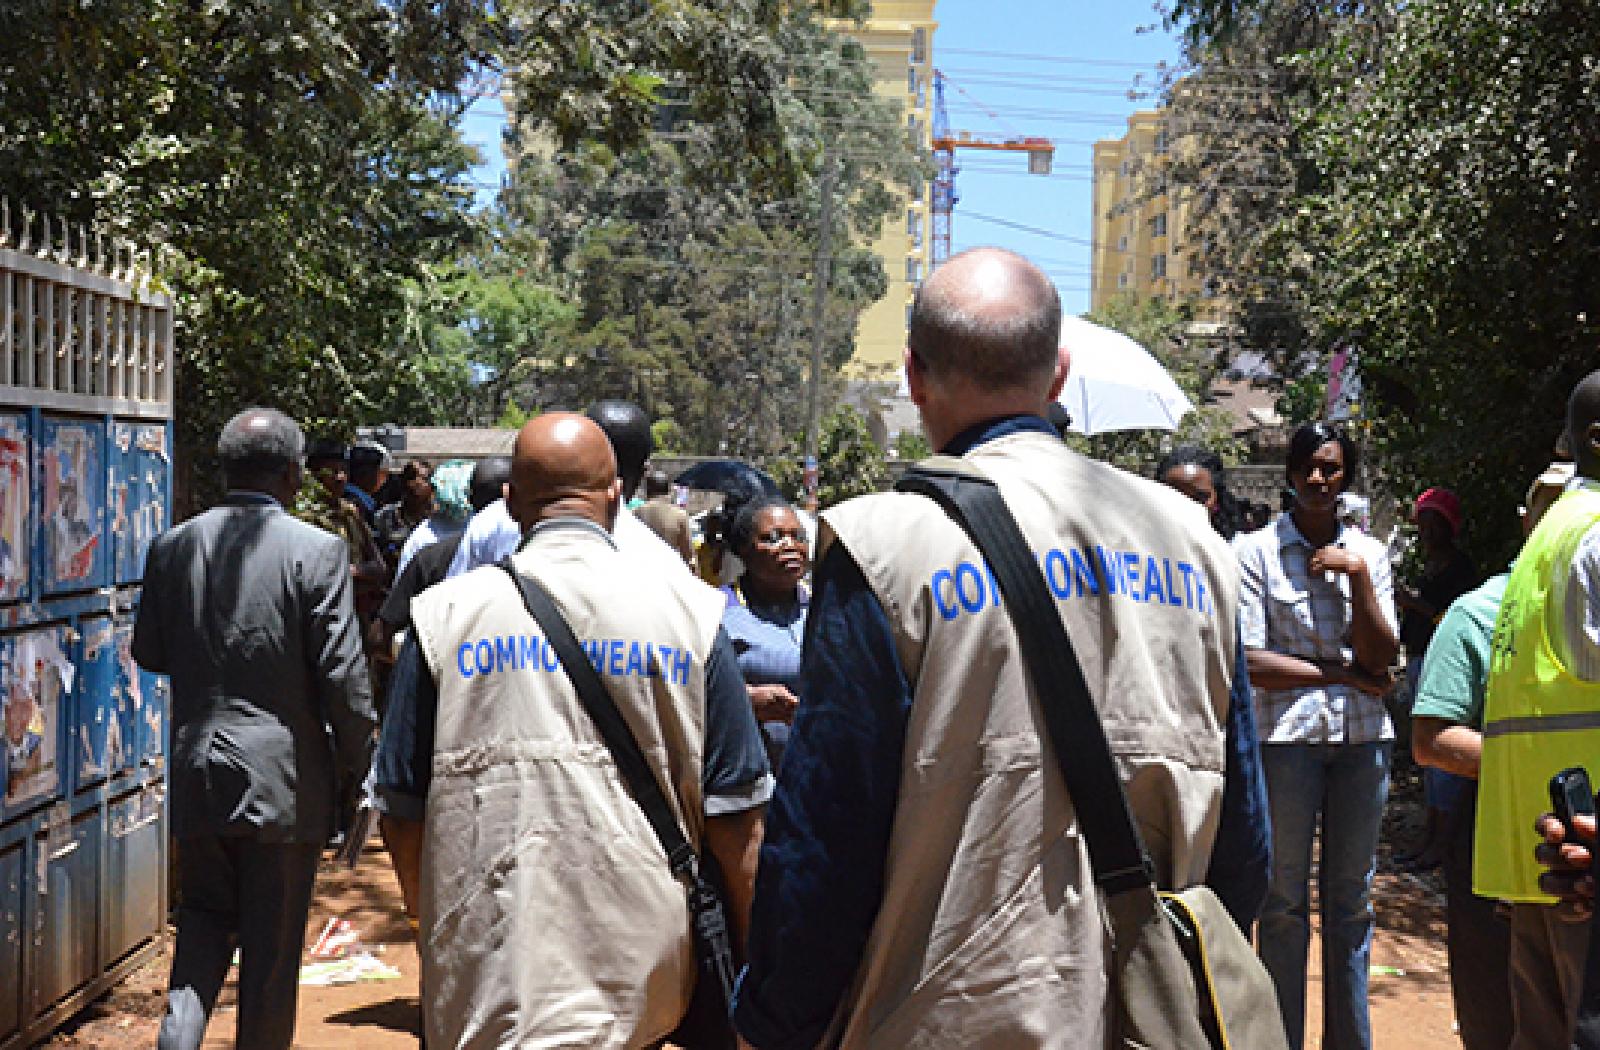 Kenya’s elections largely peaceful and transparent, Commonwealth observer mission